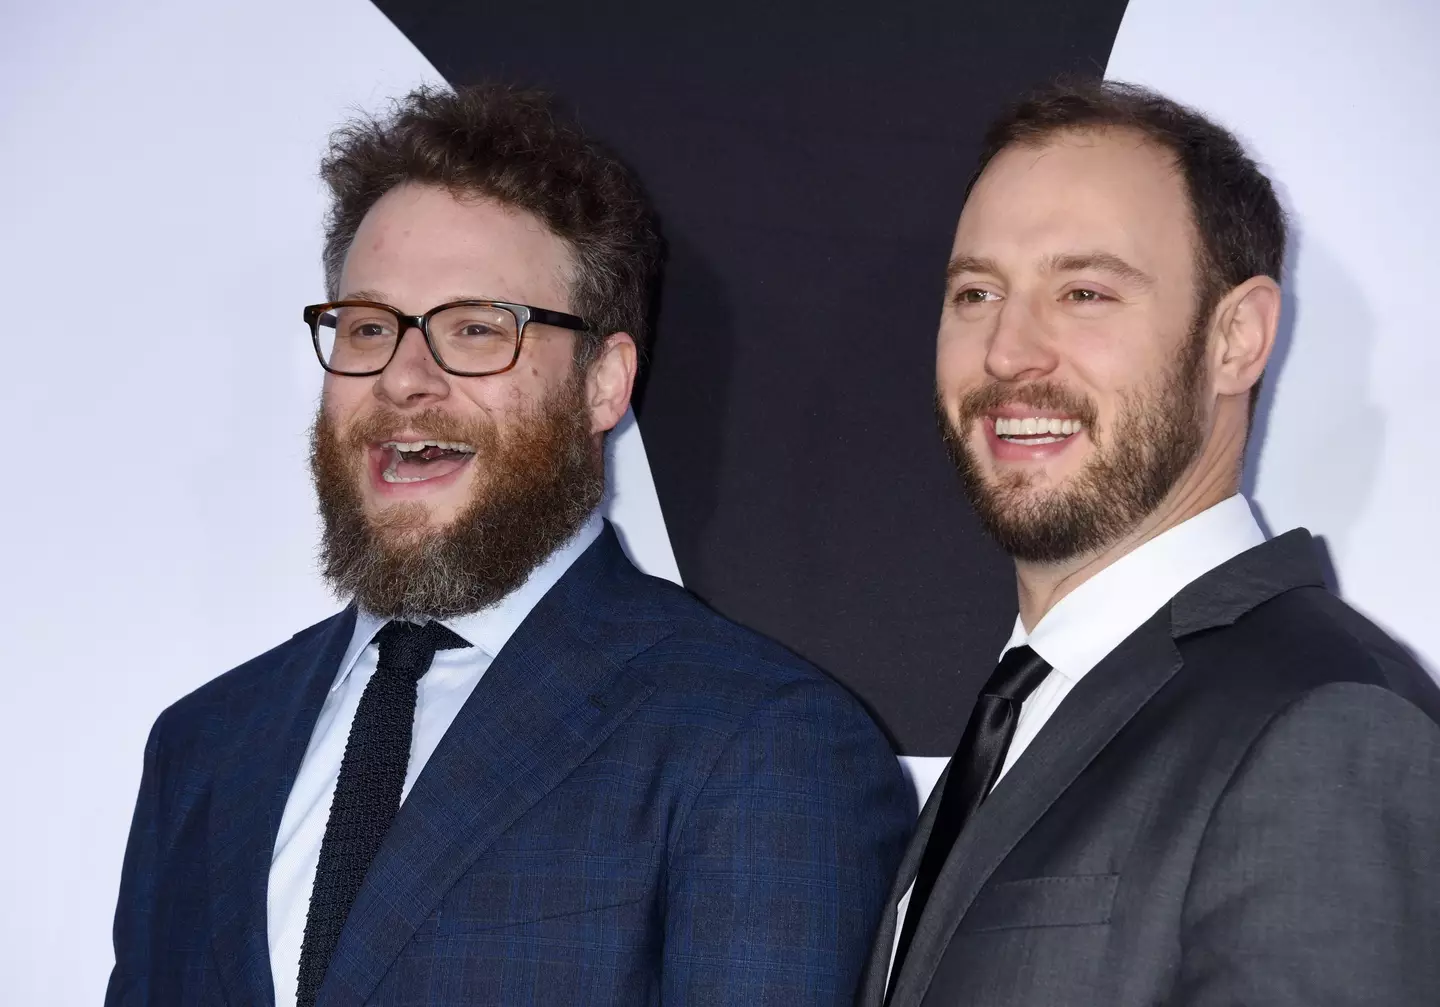 Seth Rogen and Evan Goldberg and back for the Prime TV show.